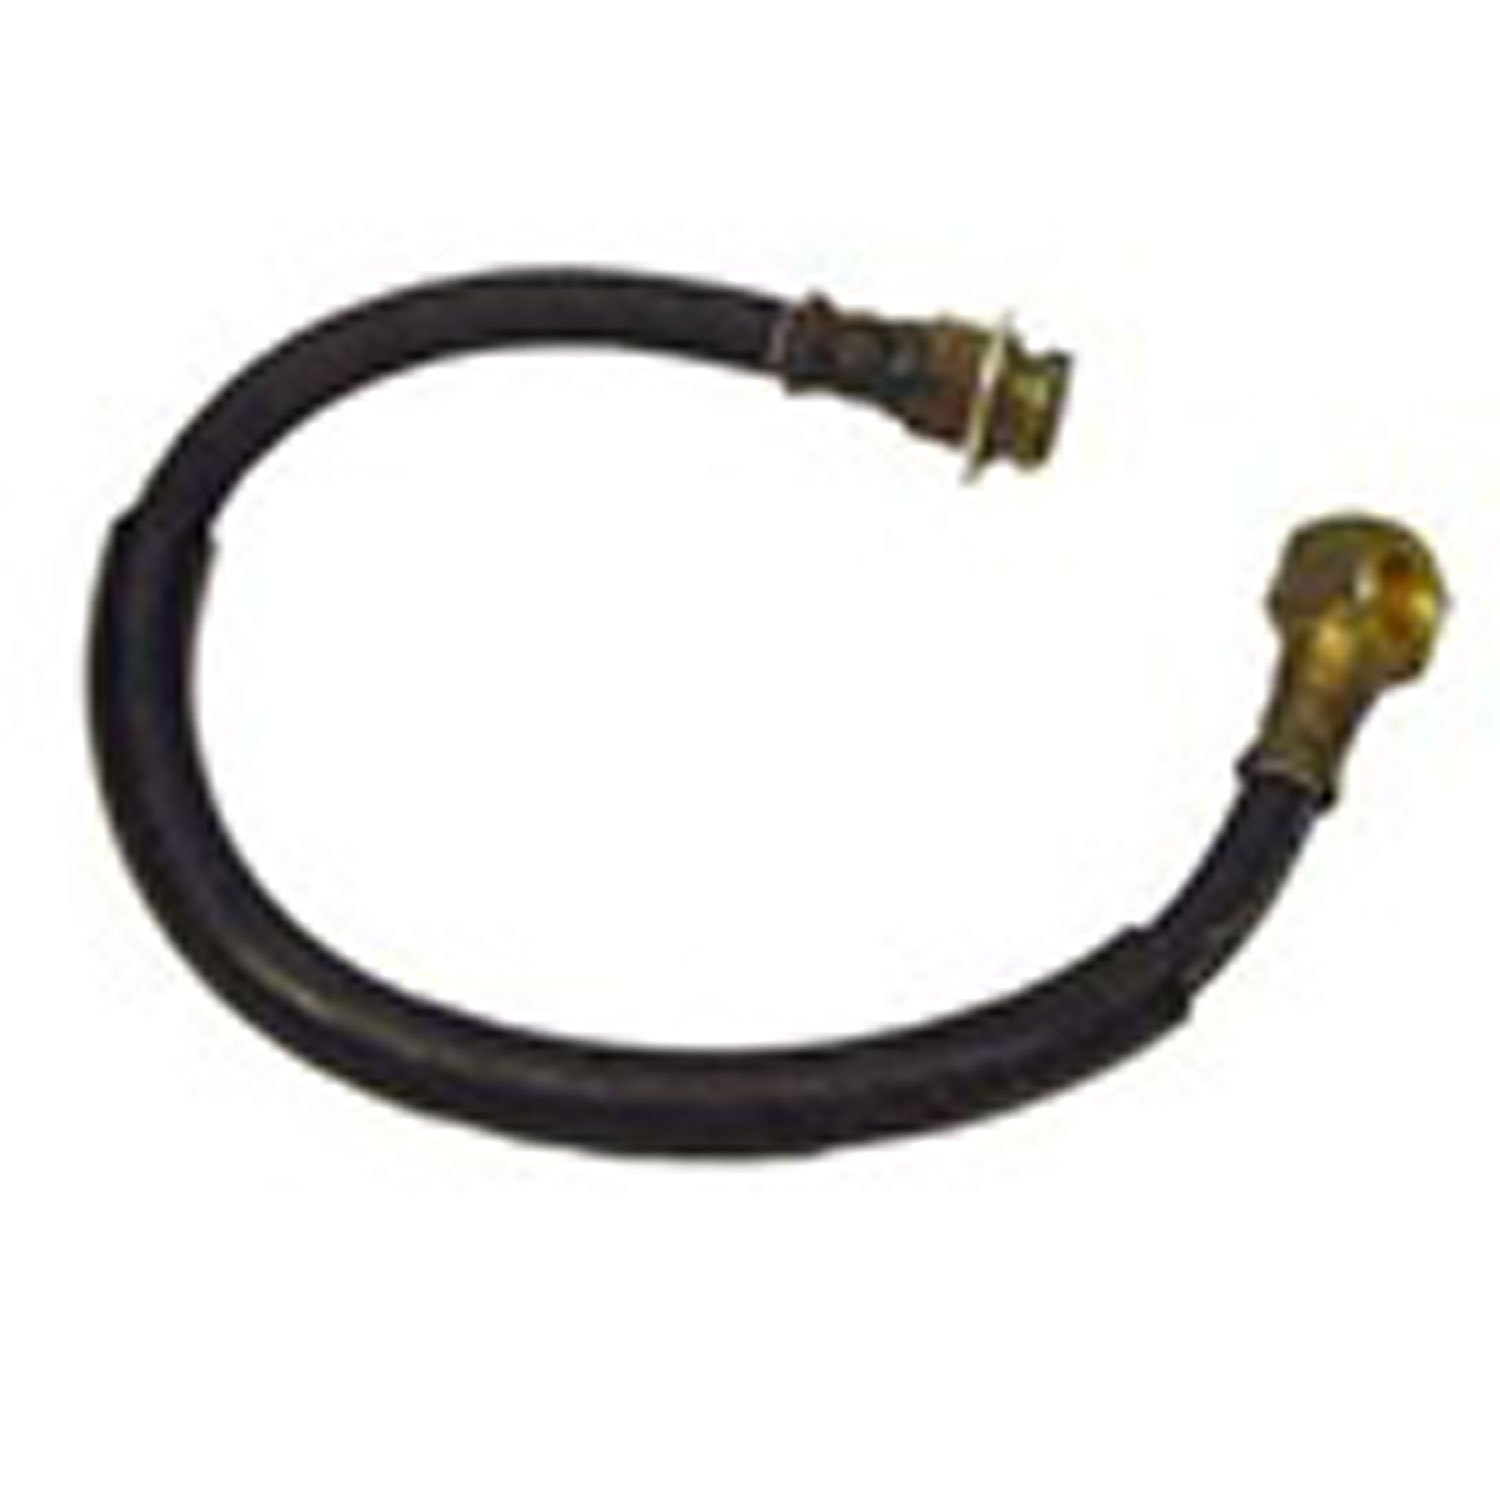 Brake Hose Front For Disc Brakes With 6-Bolt Calipers 76-78 Jeep CJ5 CJ7